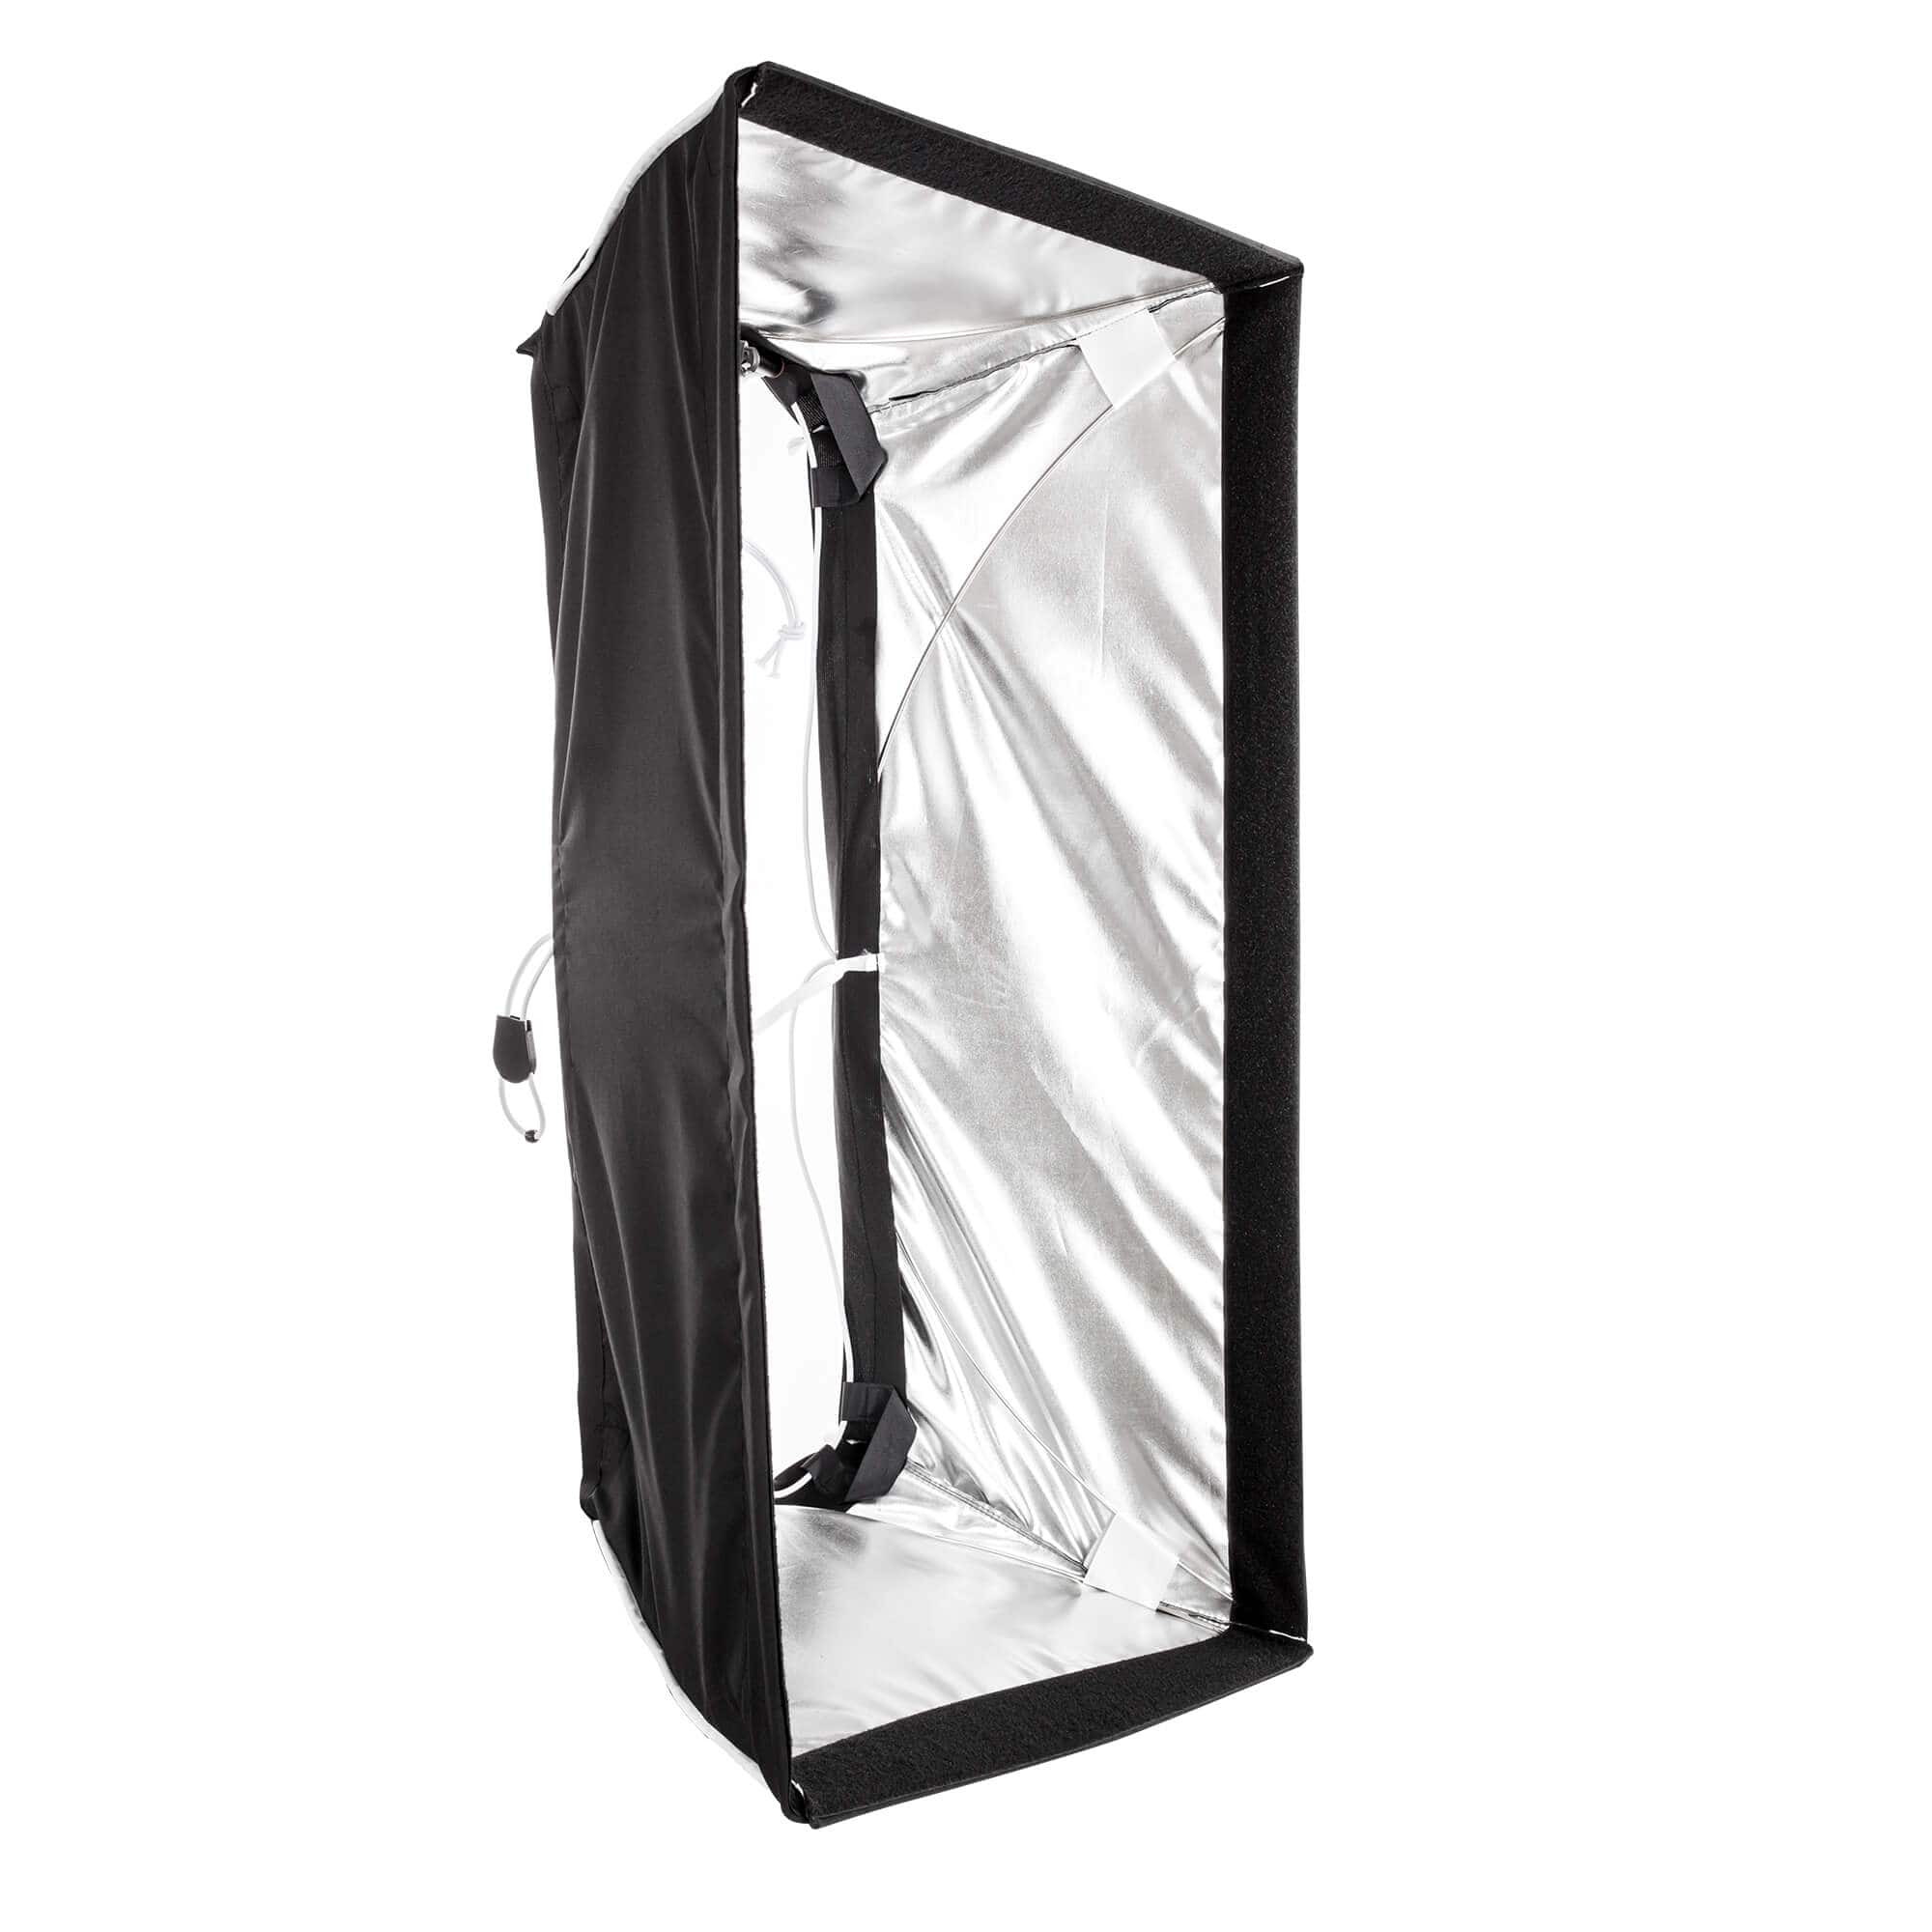 POWRIG LED Light Accessories Softbox with Grid for Arri SkyPanel S30